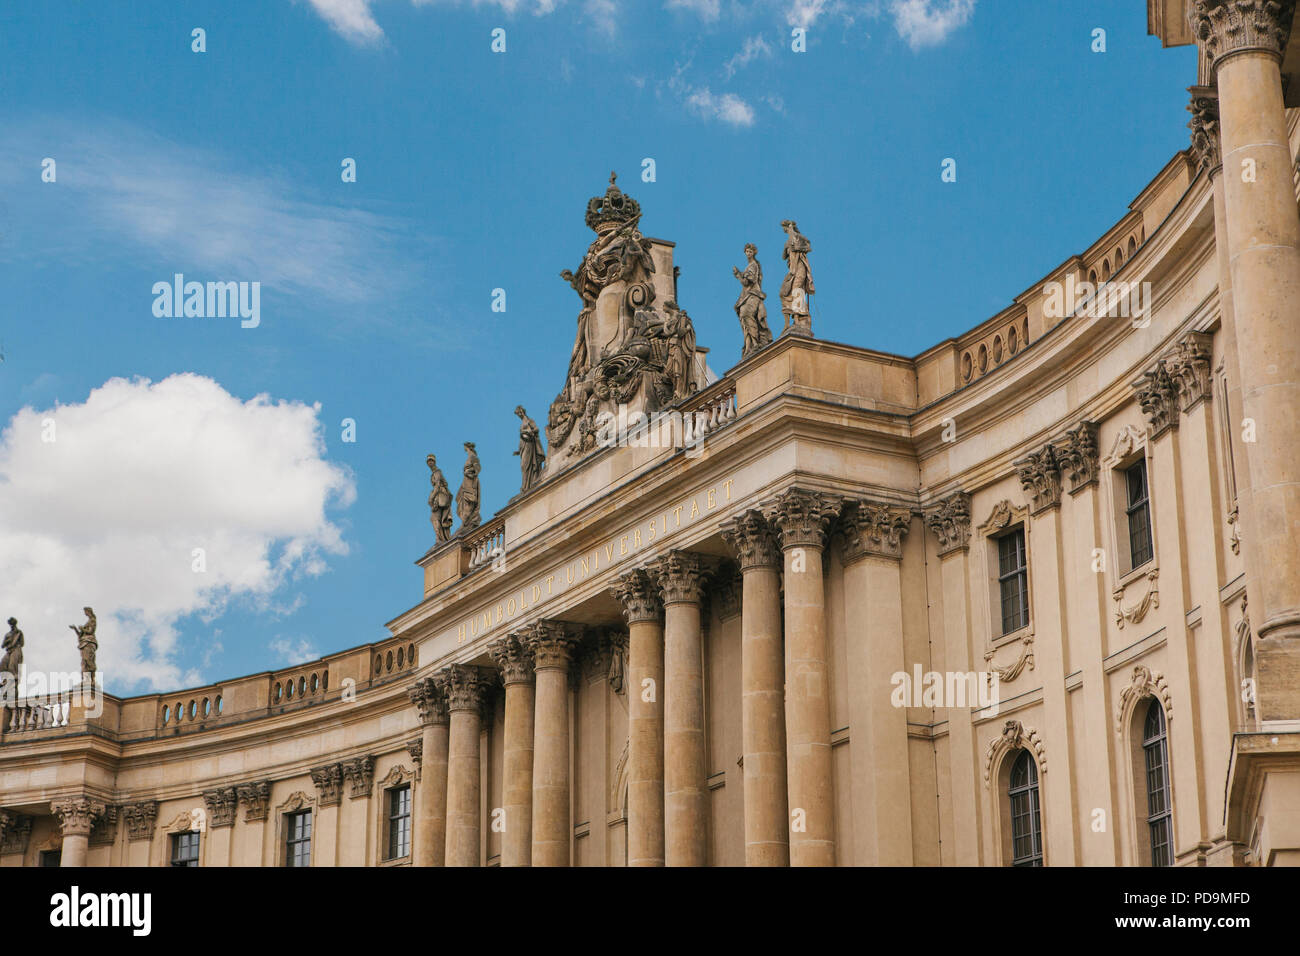 Humboldt University against a blue sky on a summer day. Berlin, Germany. Stock Photo